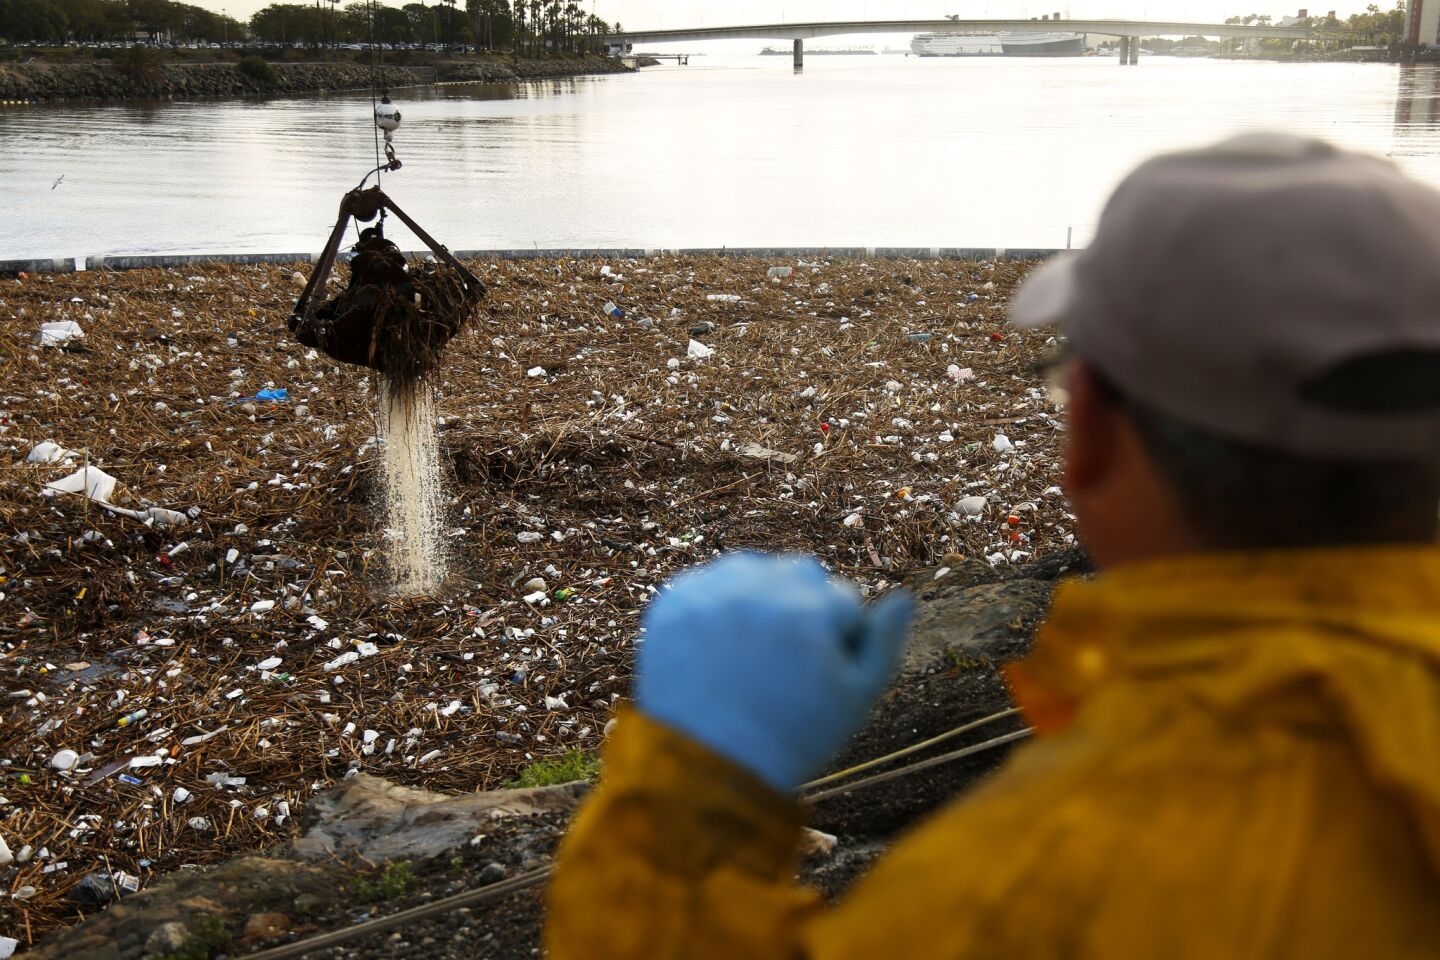 Bitelio Ramirez looks out Thursday over trash that has piled up near the mouth of the Los Angeles River after two days of heavy rain. A worker on the scene said two cranes were being used to lift out about 300 tons of trash.